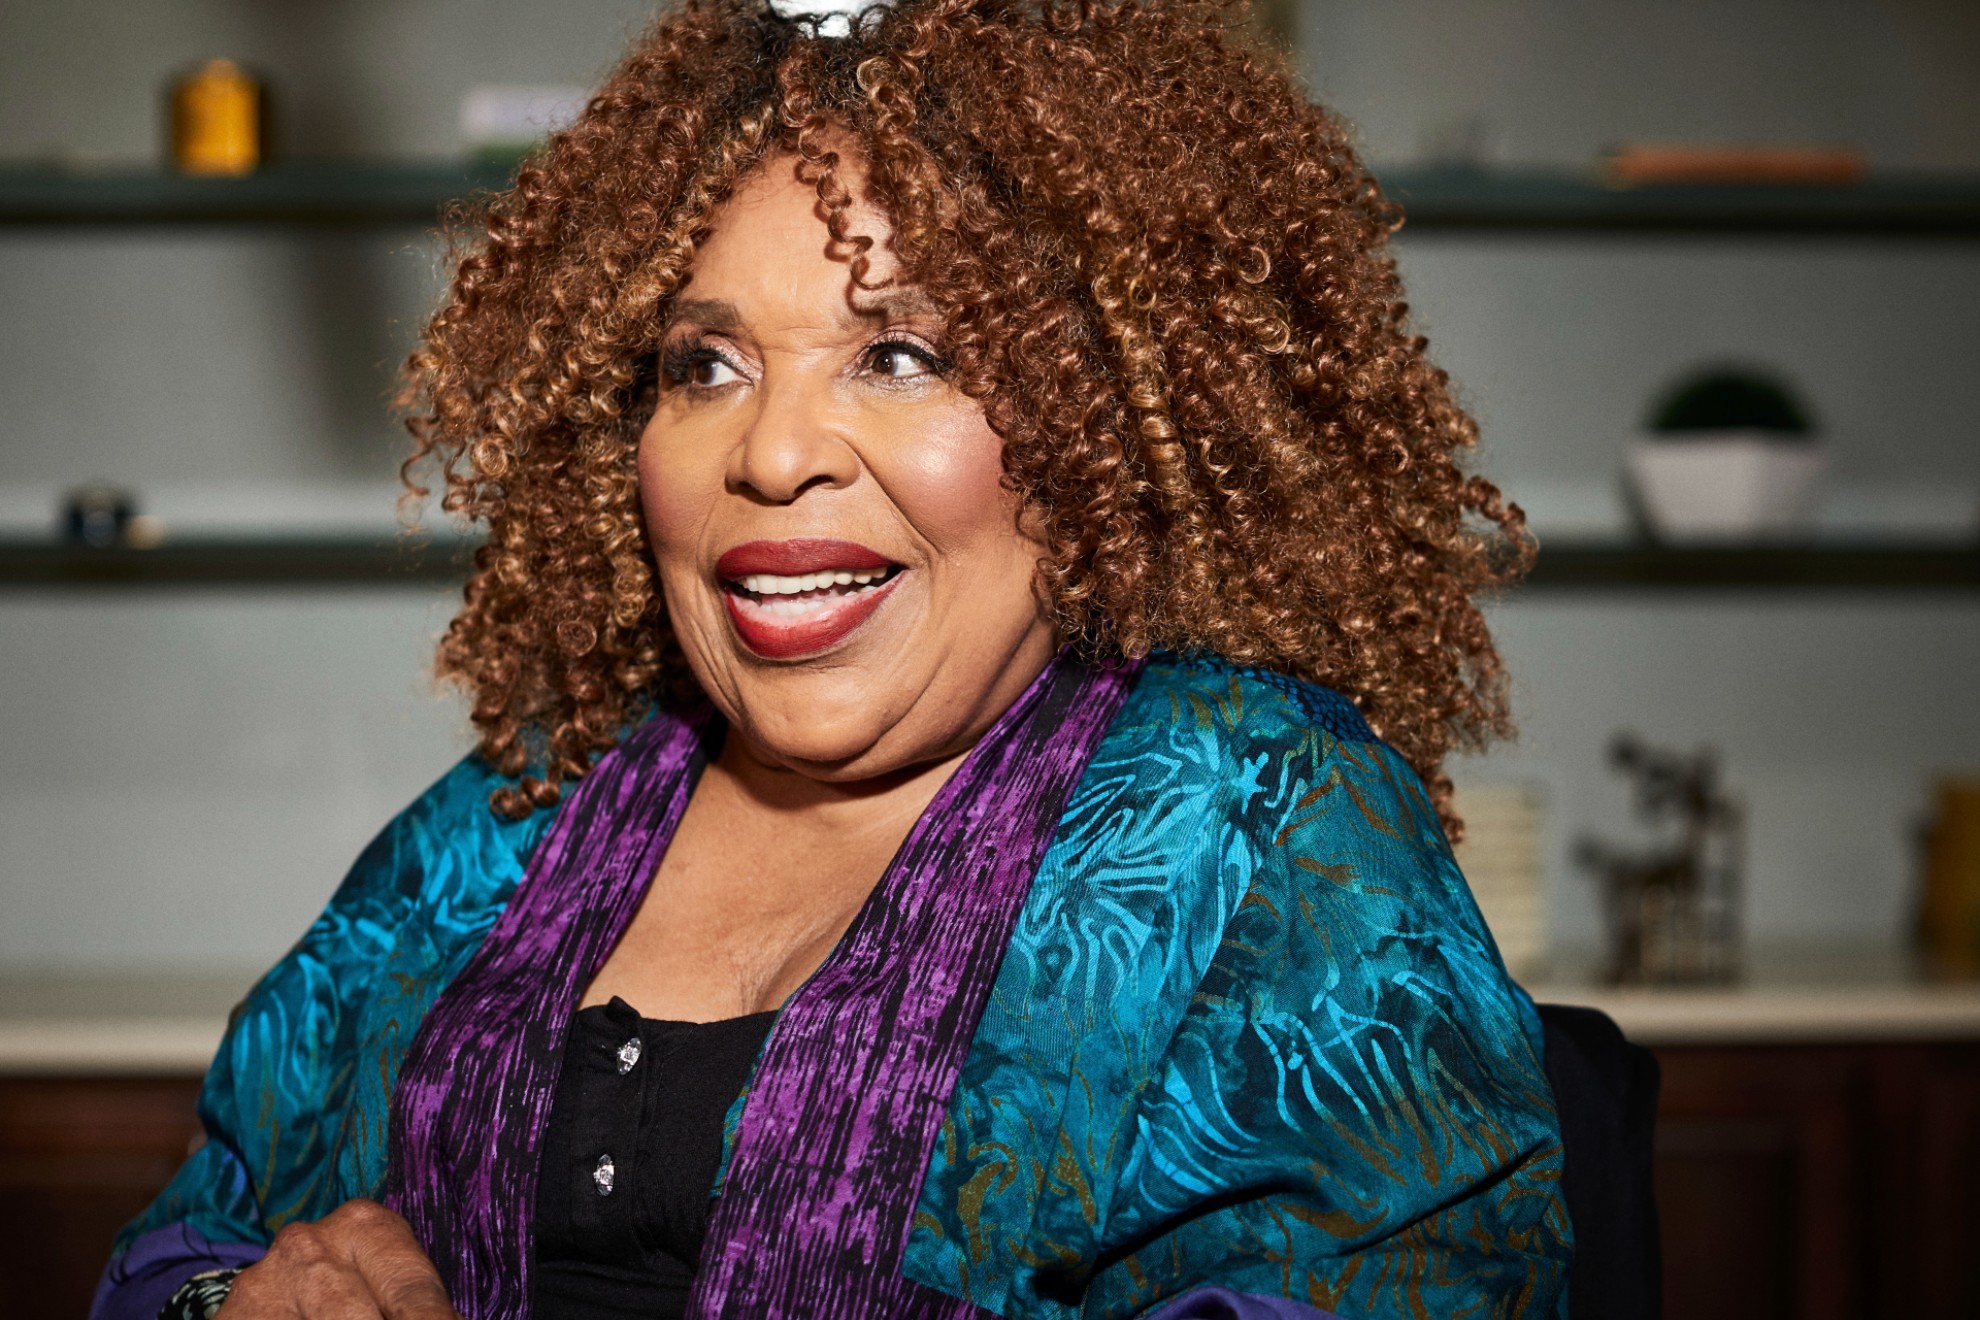 Singer Roberta Flack poses for a portrait in New York.